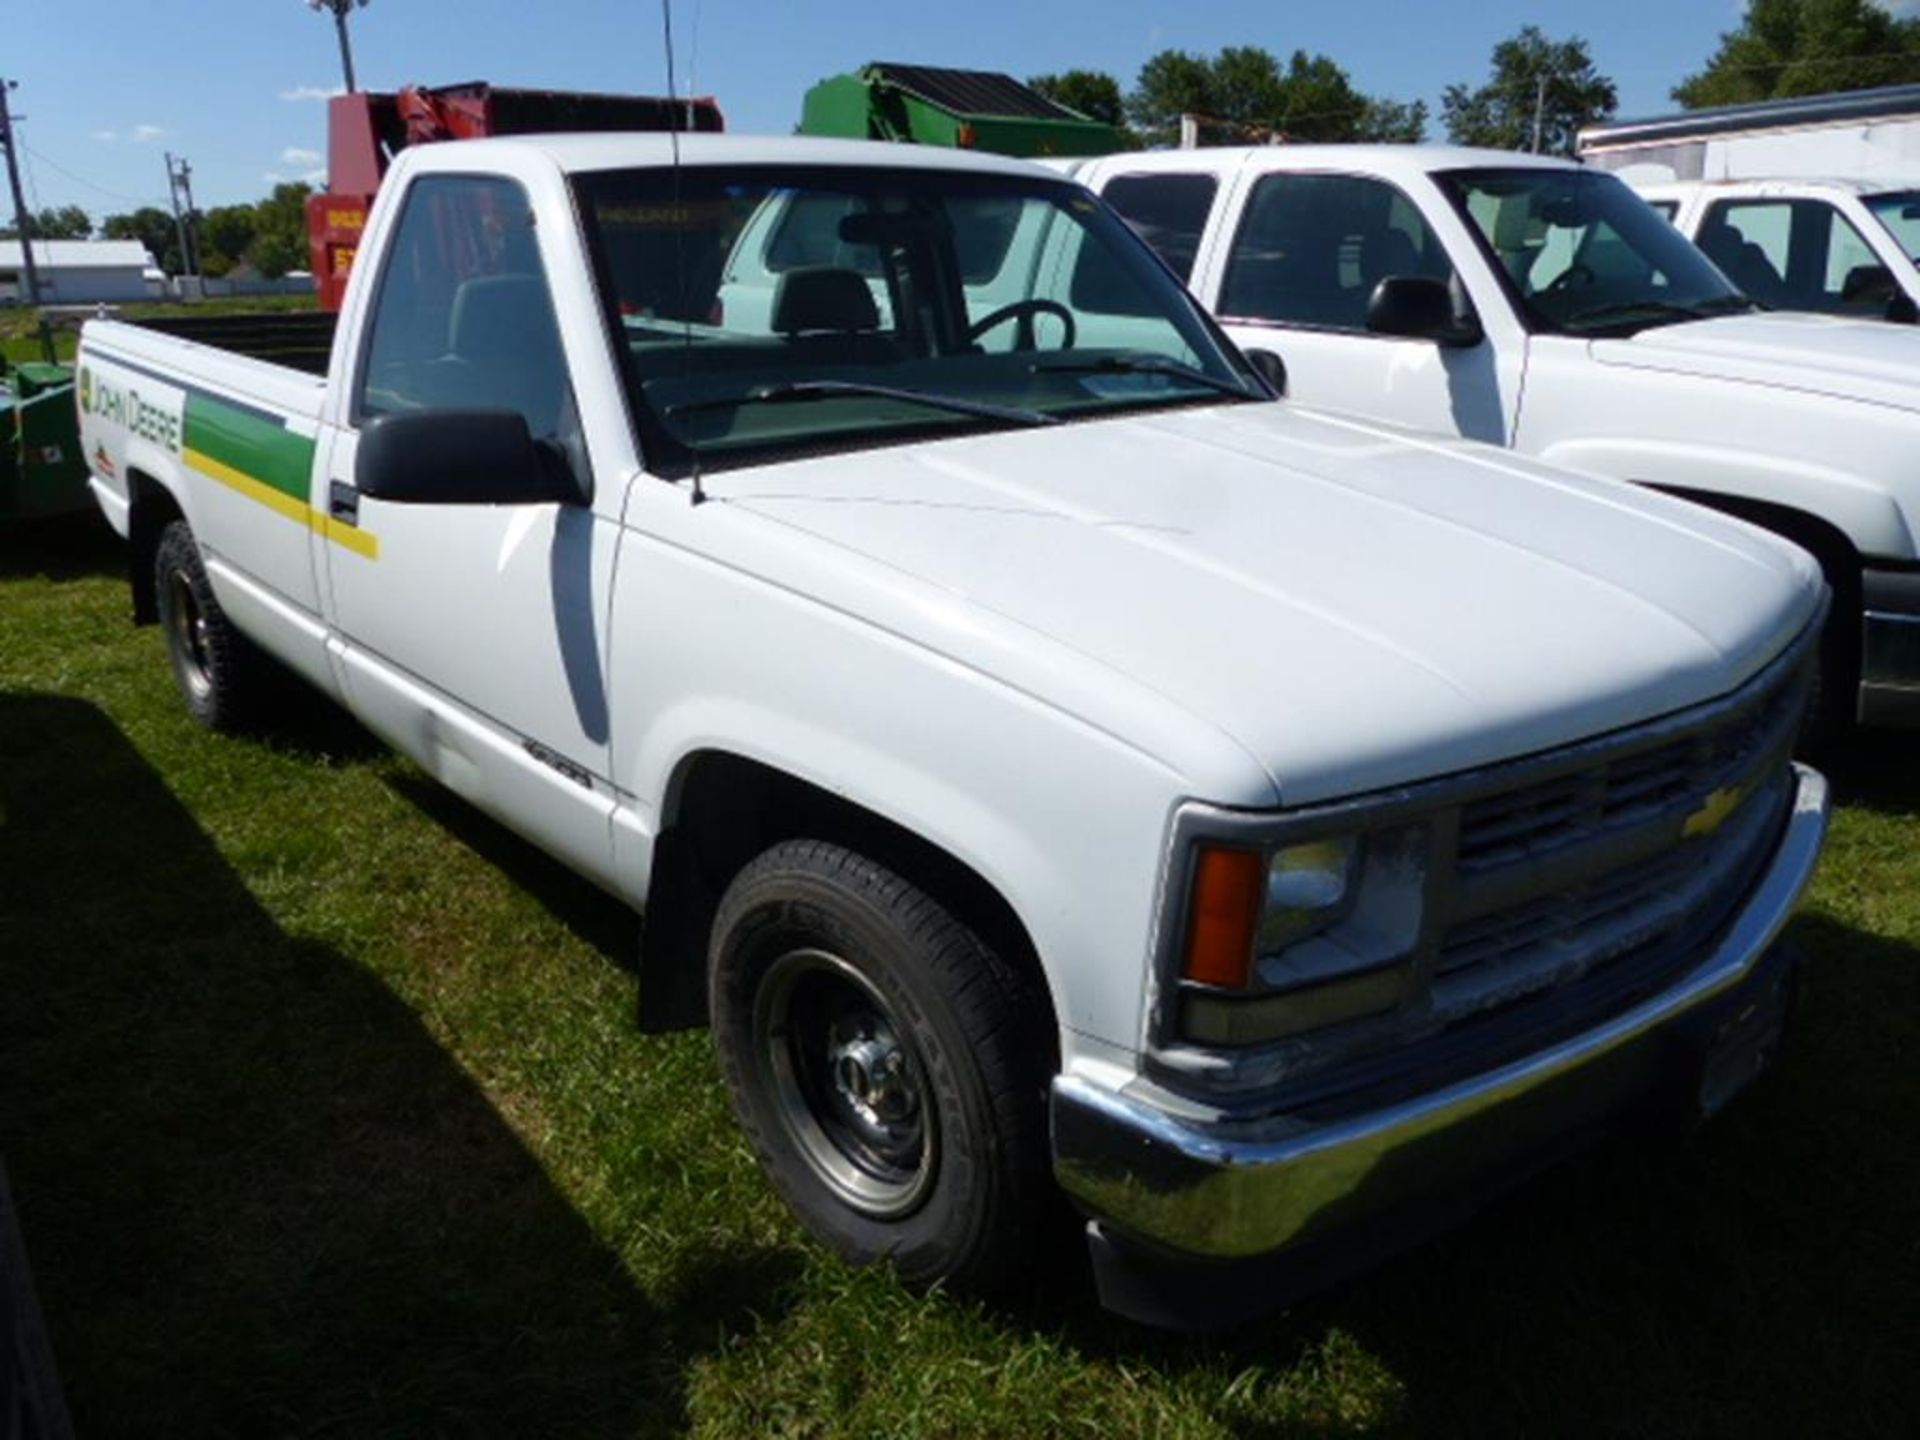 1997 CHEVY WT 1500 REG CAB 2WD PICKUP, 8' BED W/LINER AND LUVERED TAILGATE, V6 AUTO, CLOTH - Image 7 of 7